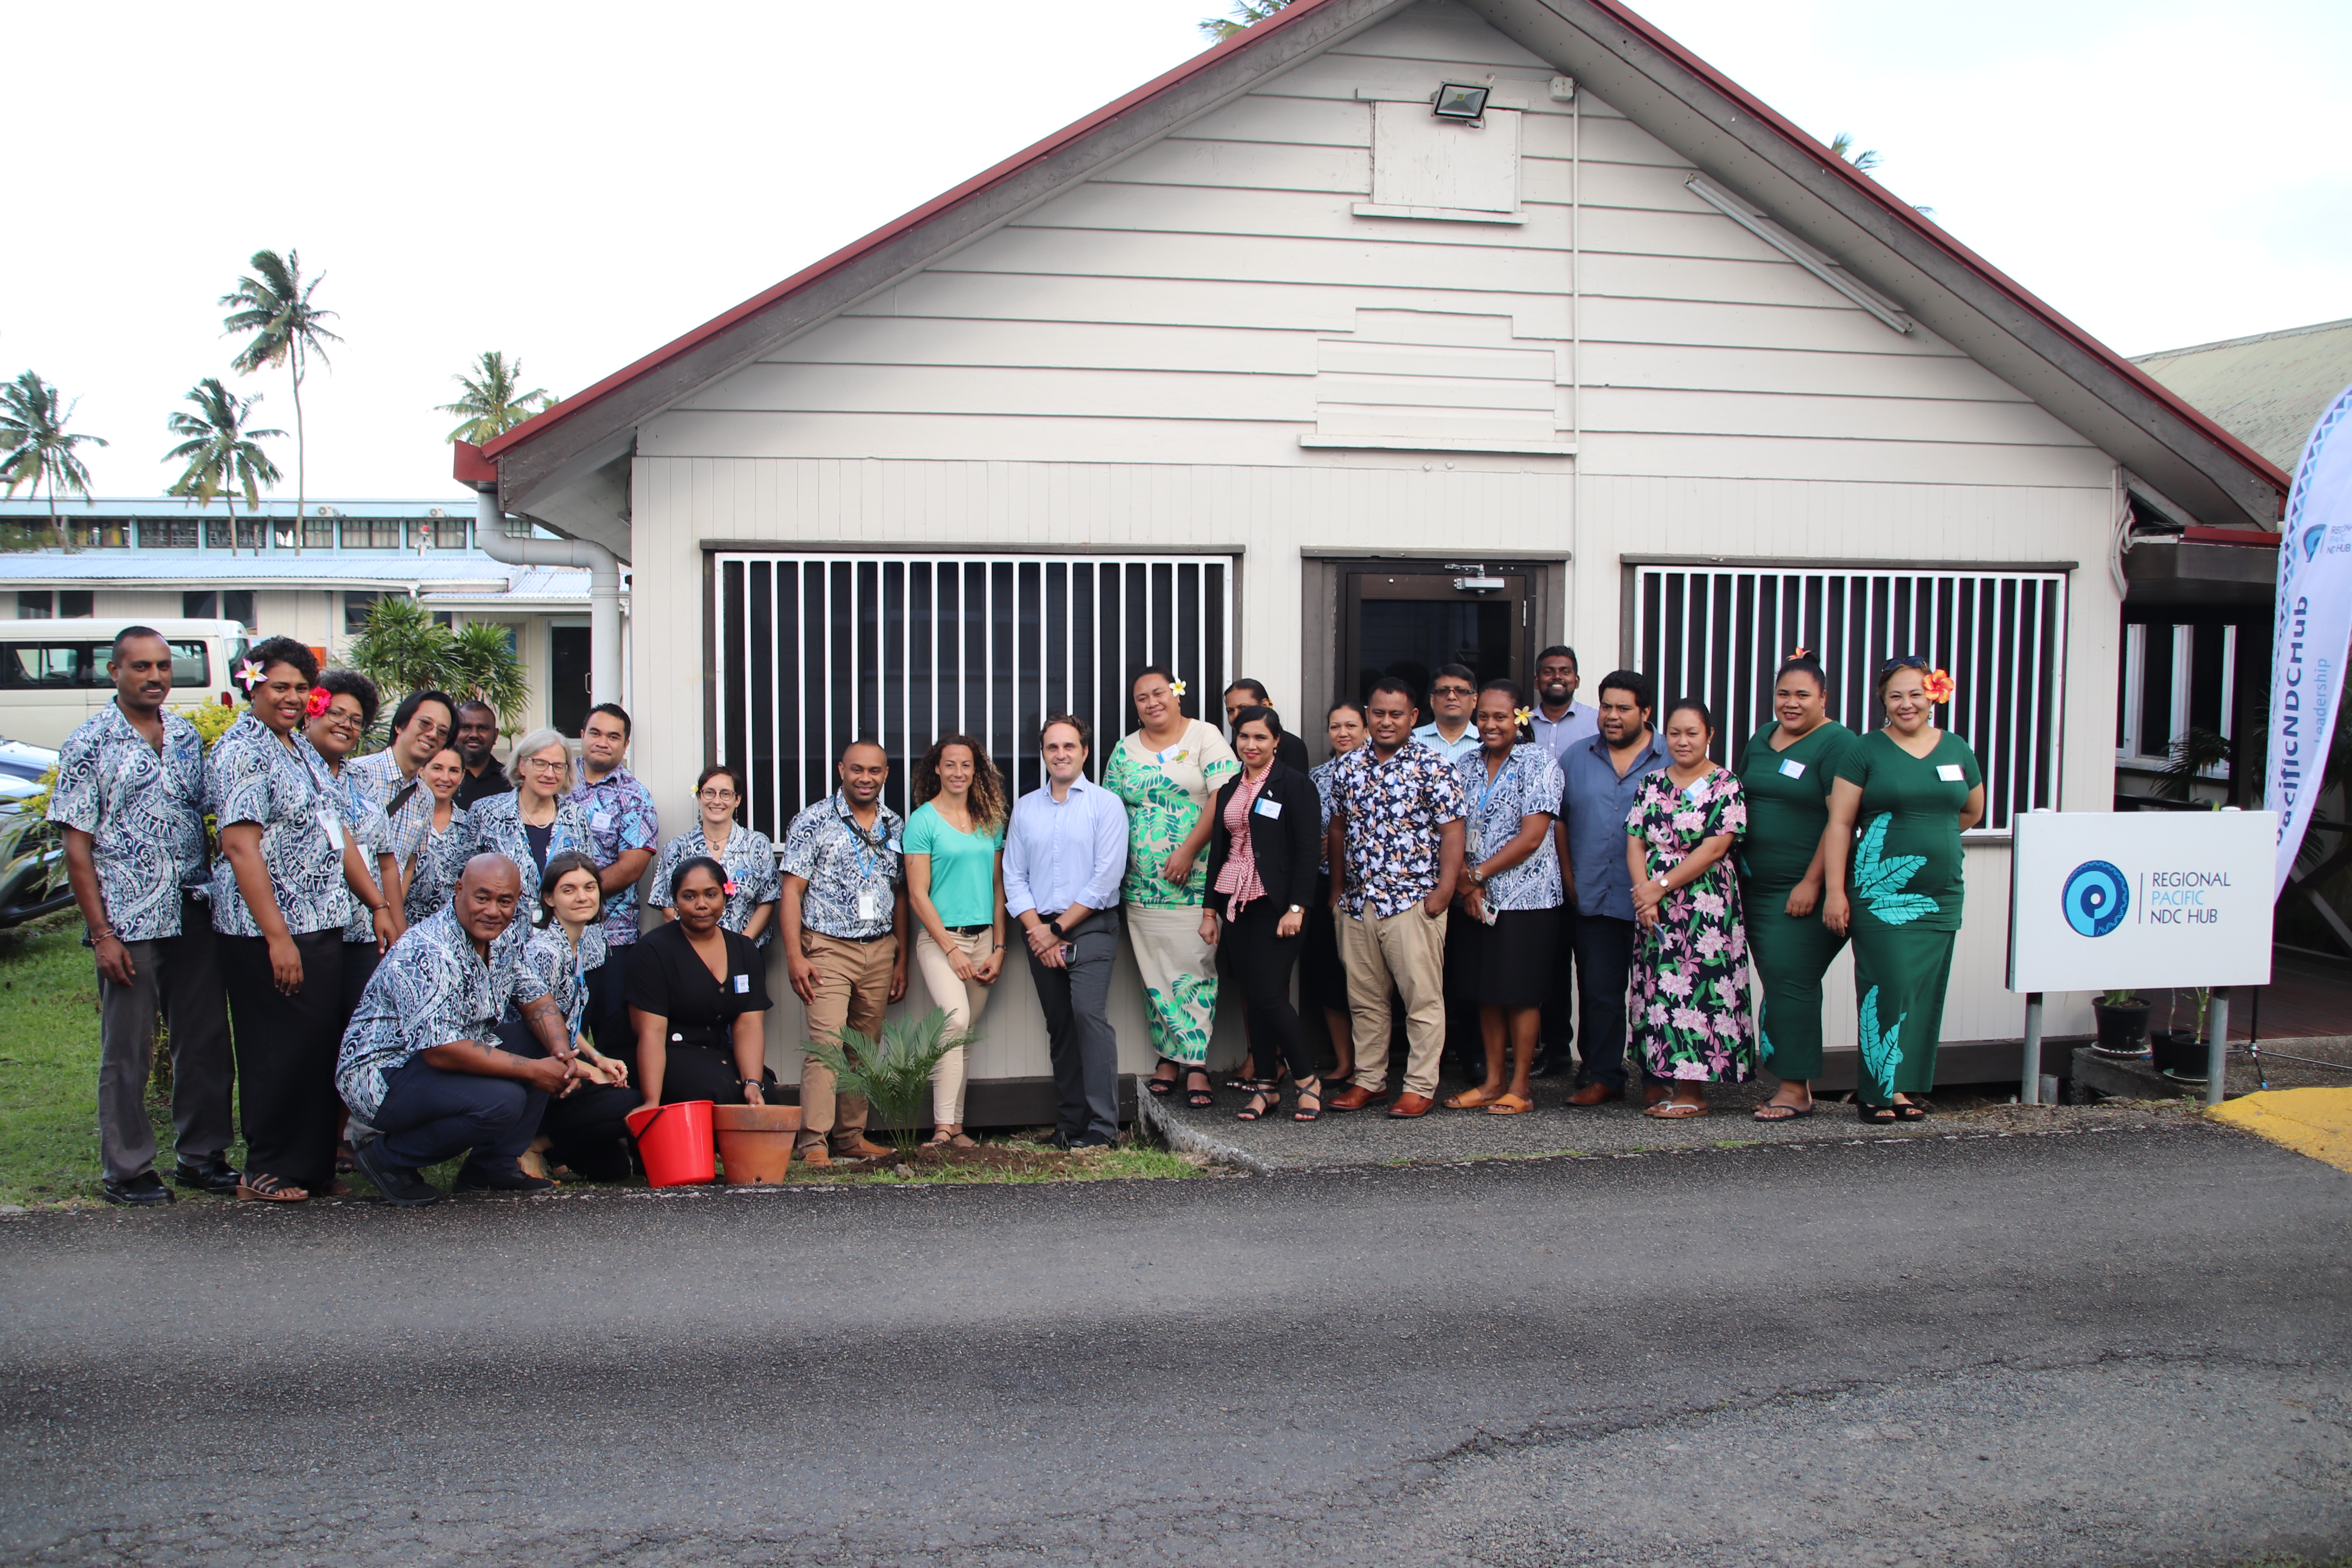 Participants of the annual Focal Point Meeting of the Regional Pacific NDC Hub plant a tree in front of the NDC Hub office.